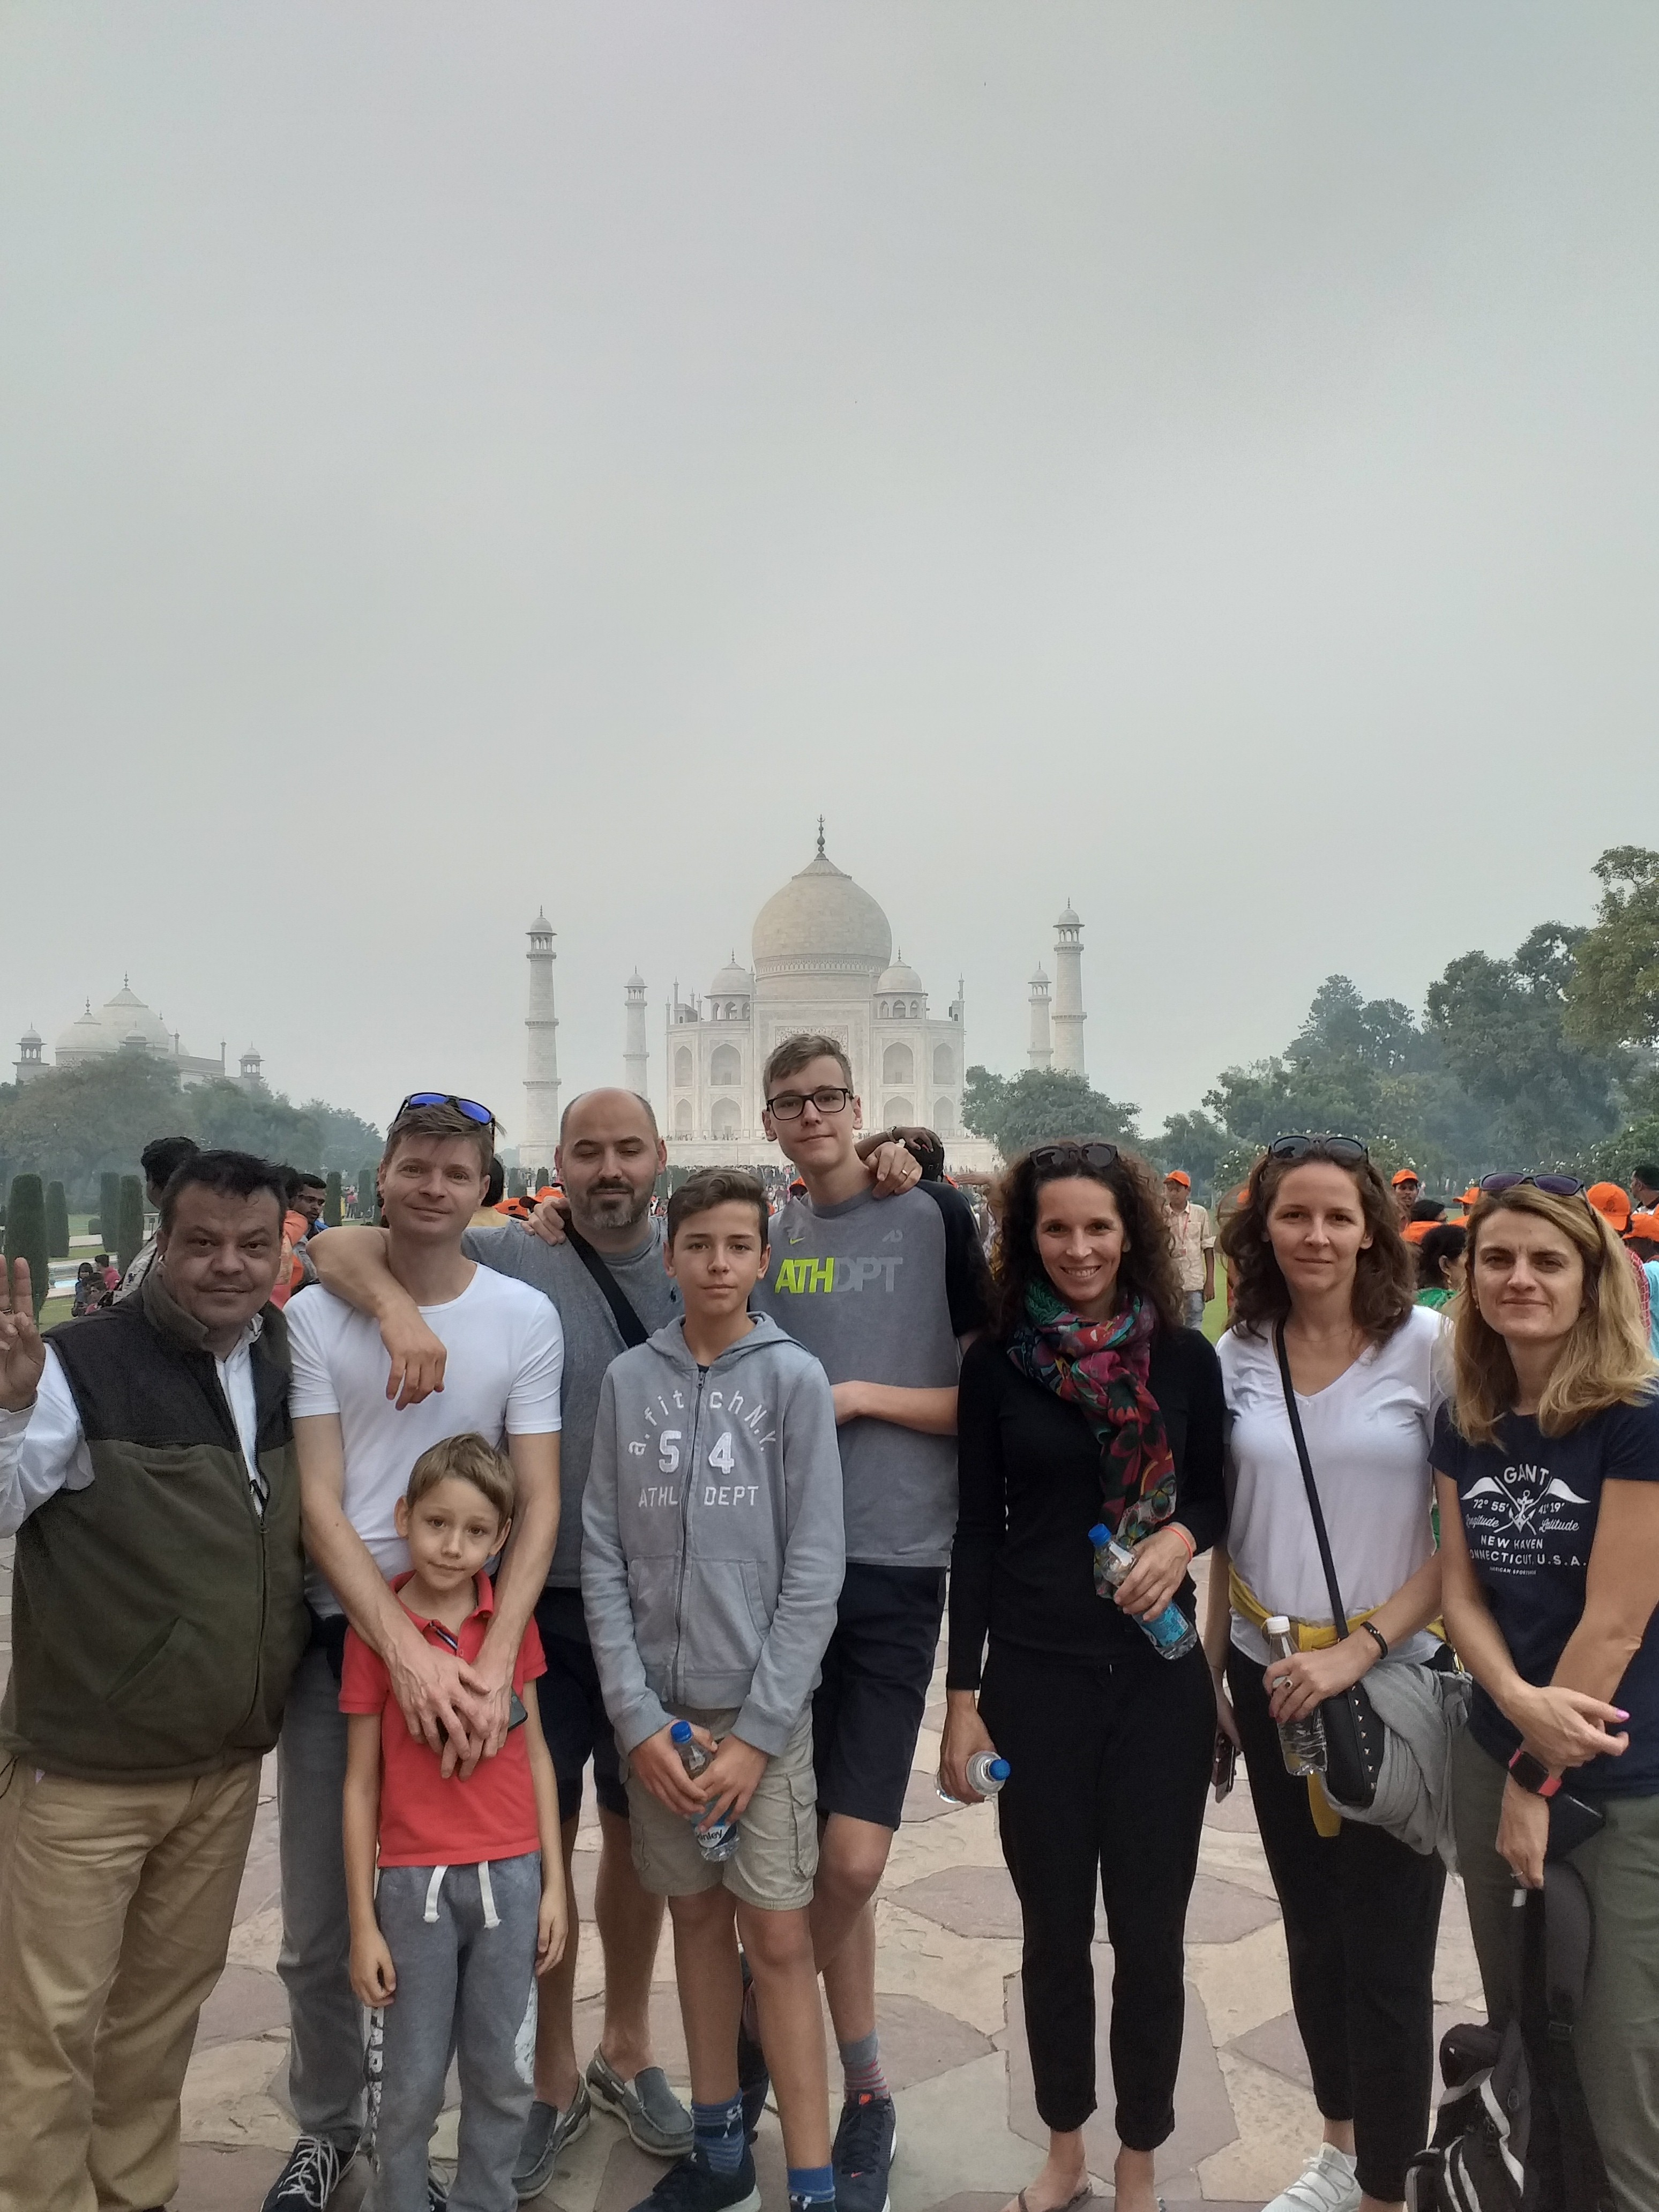 Car Rental from Delhi,Rajasthan Tour Packages from Delhi,Taj mahal tour package,India tour package from Delhi,Delhi tour and travel packages